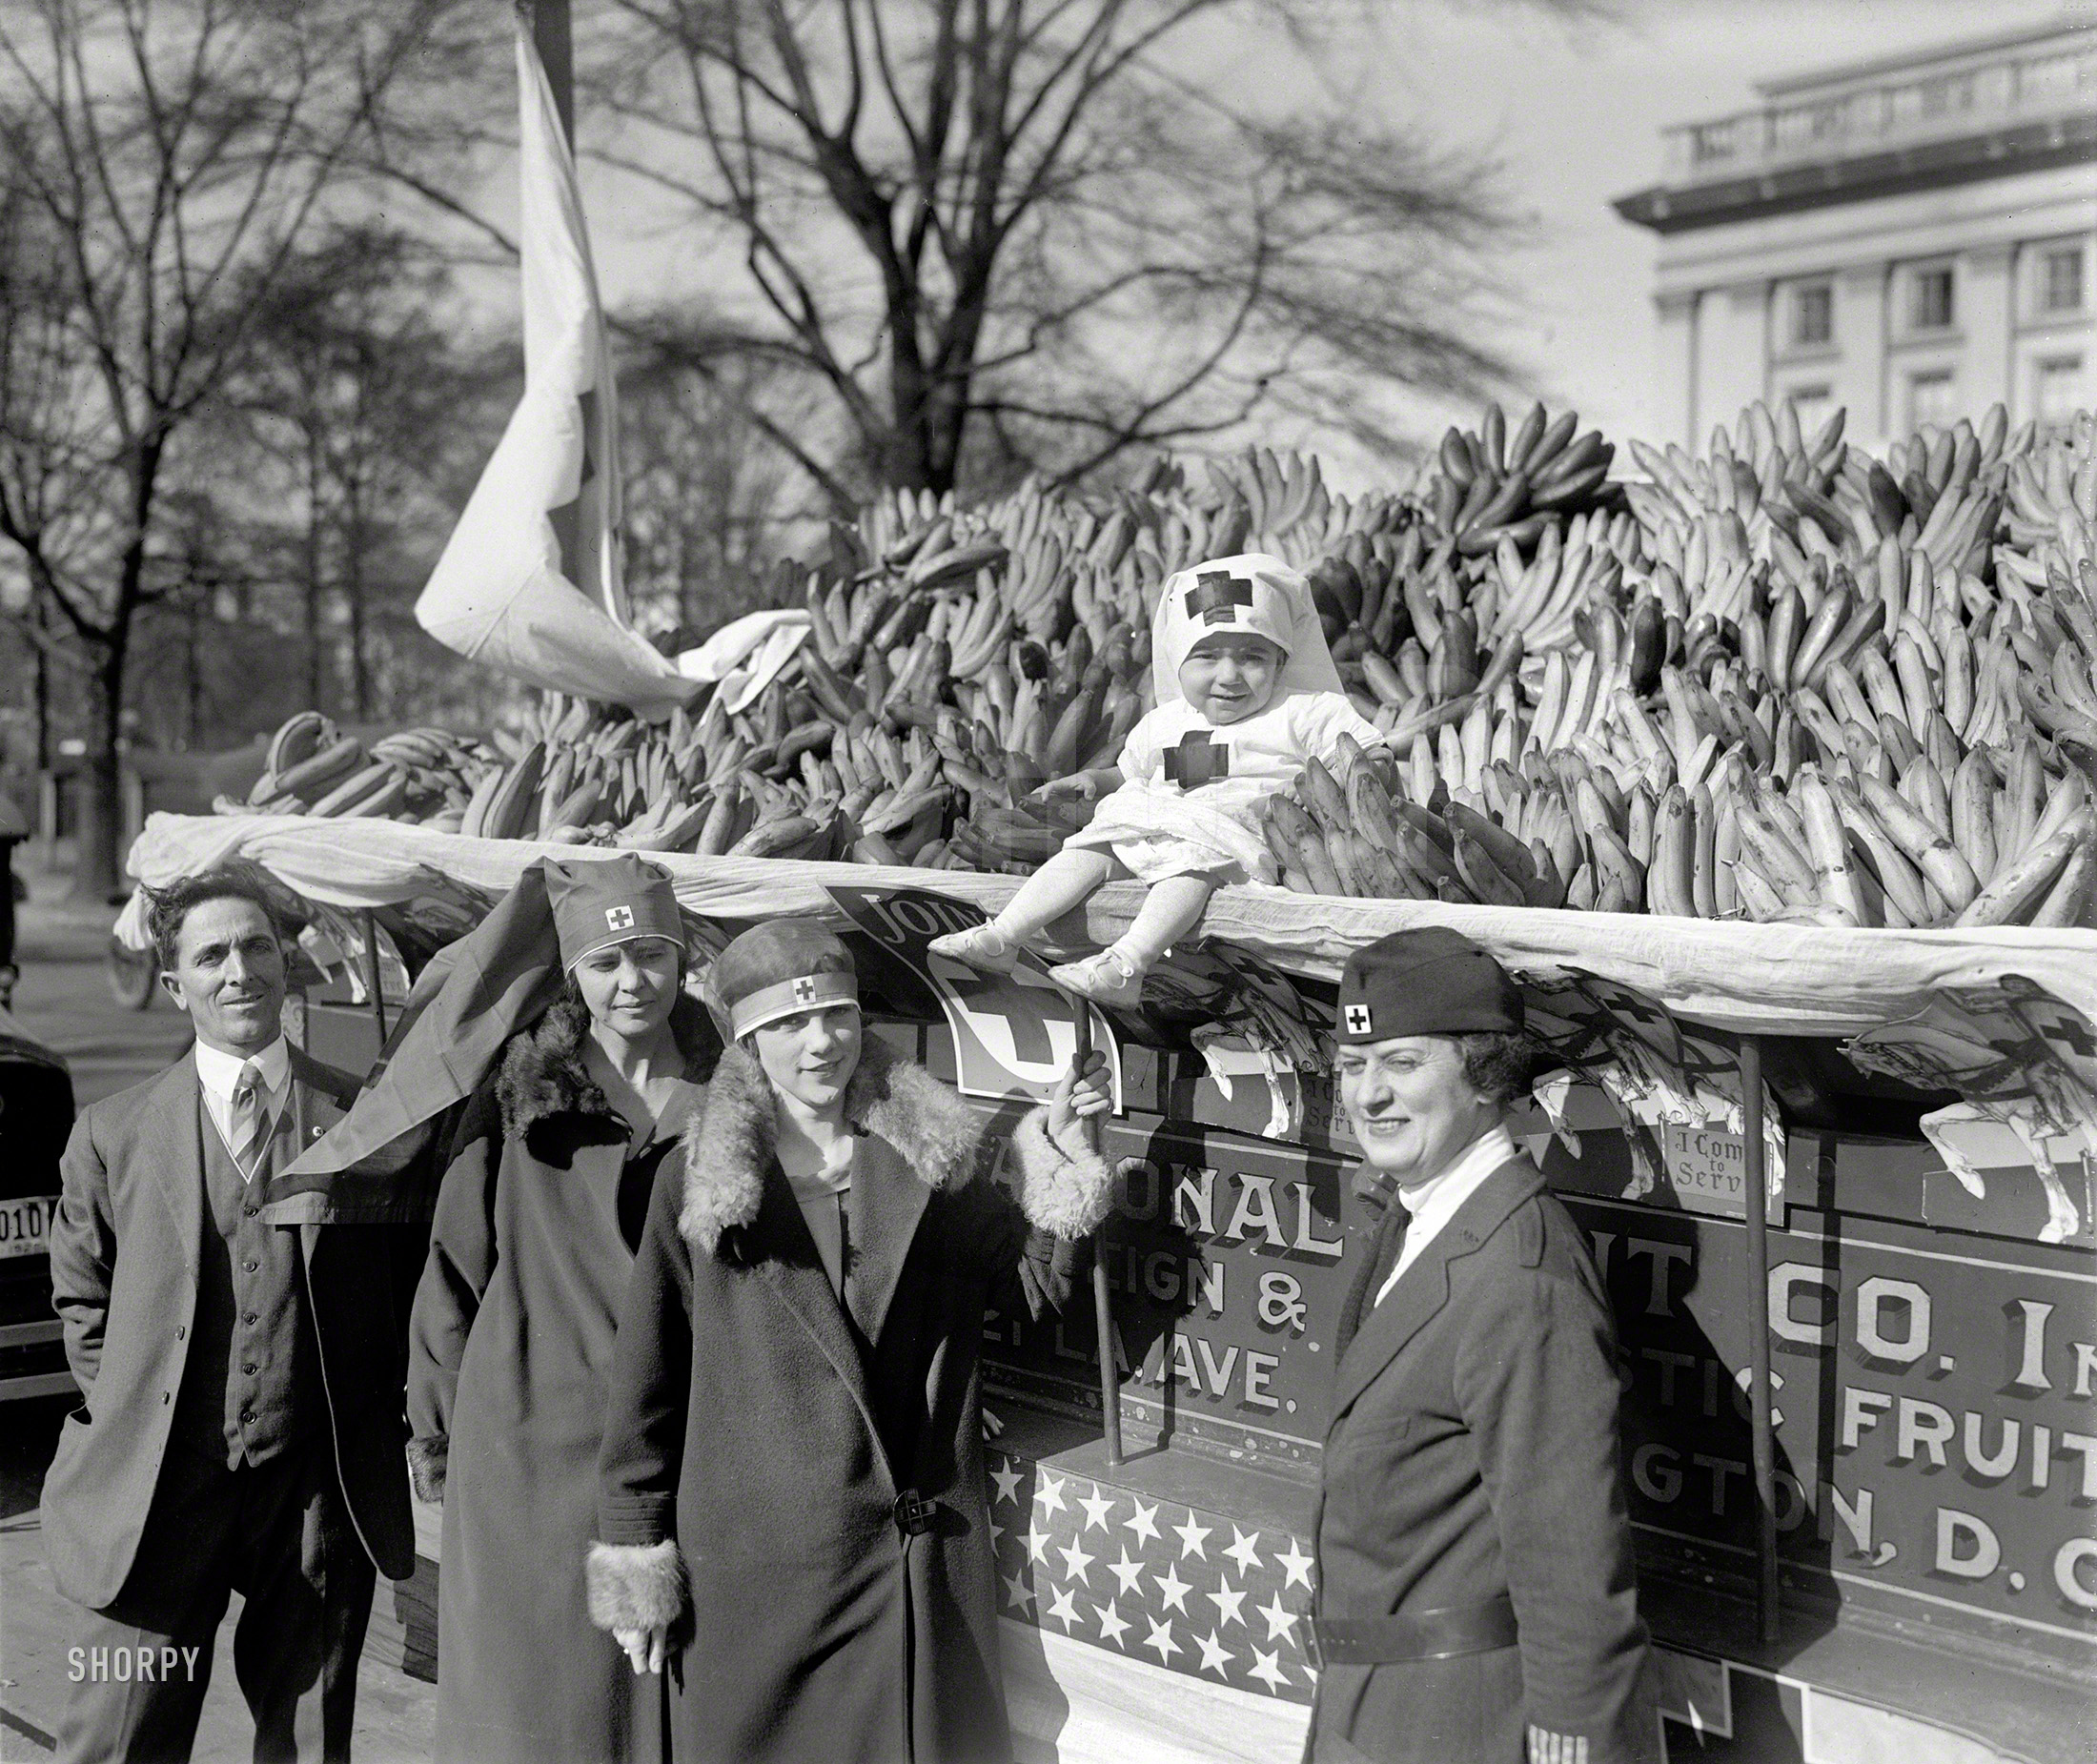 Nov. 14, 1925. Washington, D.C. "Auction of bananas for Red Cross." The baby is Josephine Scalco, whose father, Salvatore Scalco of the National Fruit Co., is standing at left and whose family was last seen here and here. View full size.